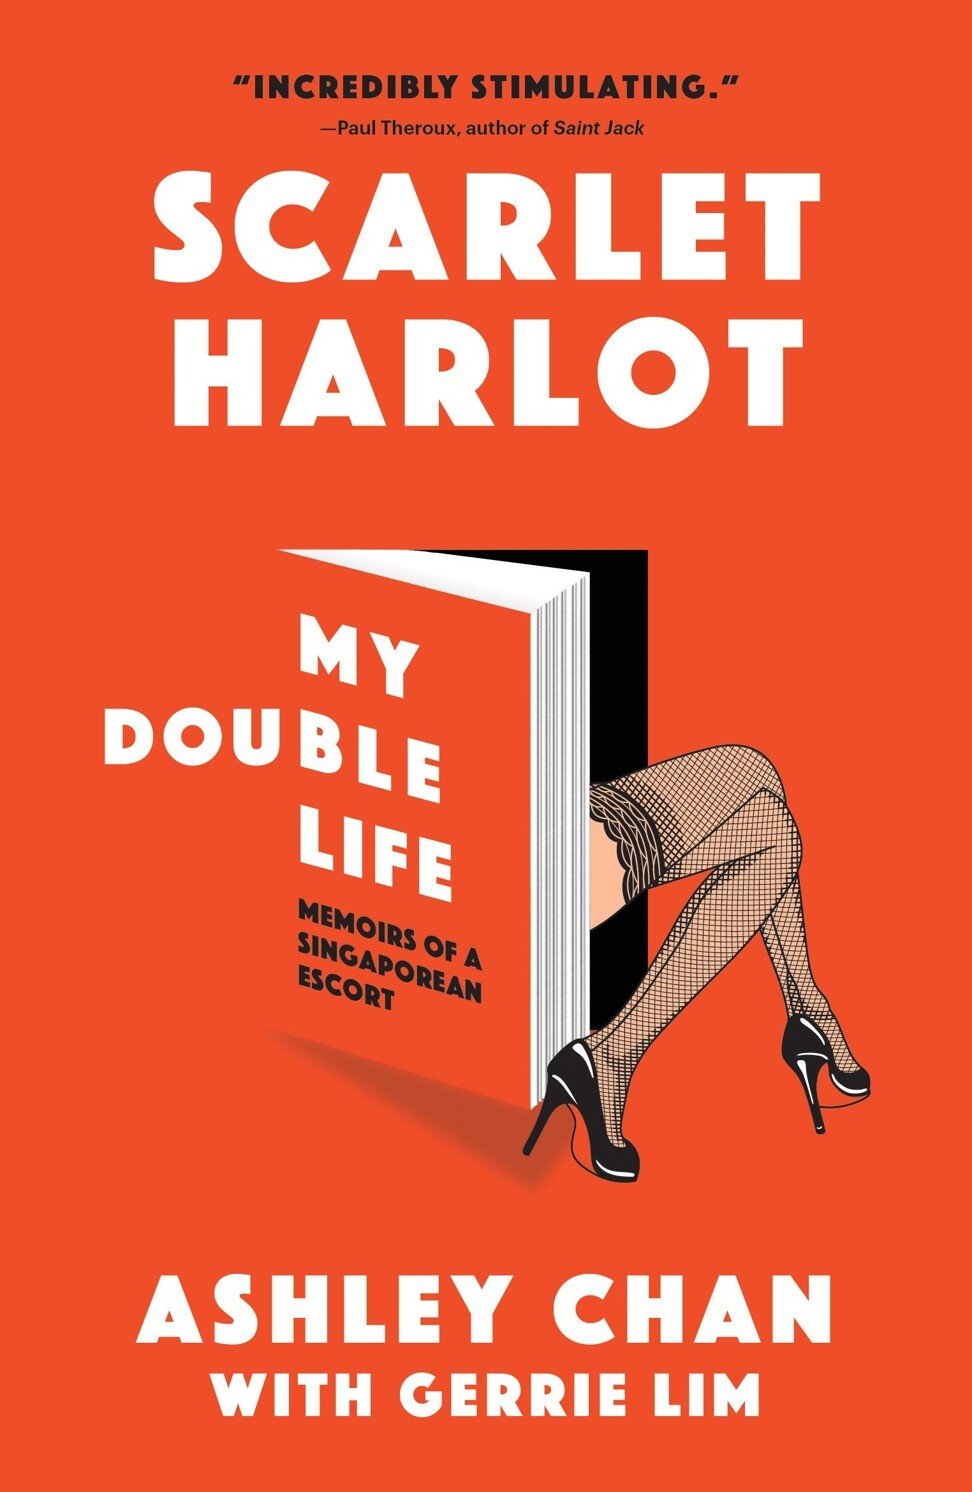 Cover of Scarlet Harlot: My Double Life. Image: Epigram